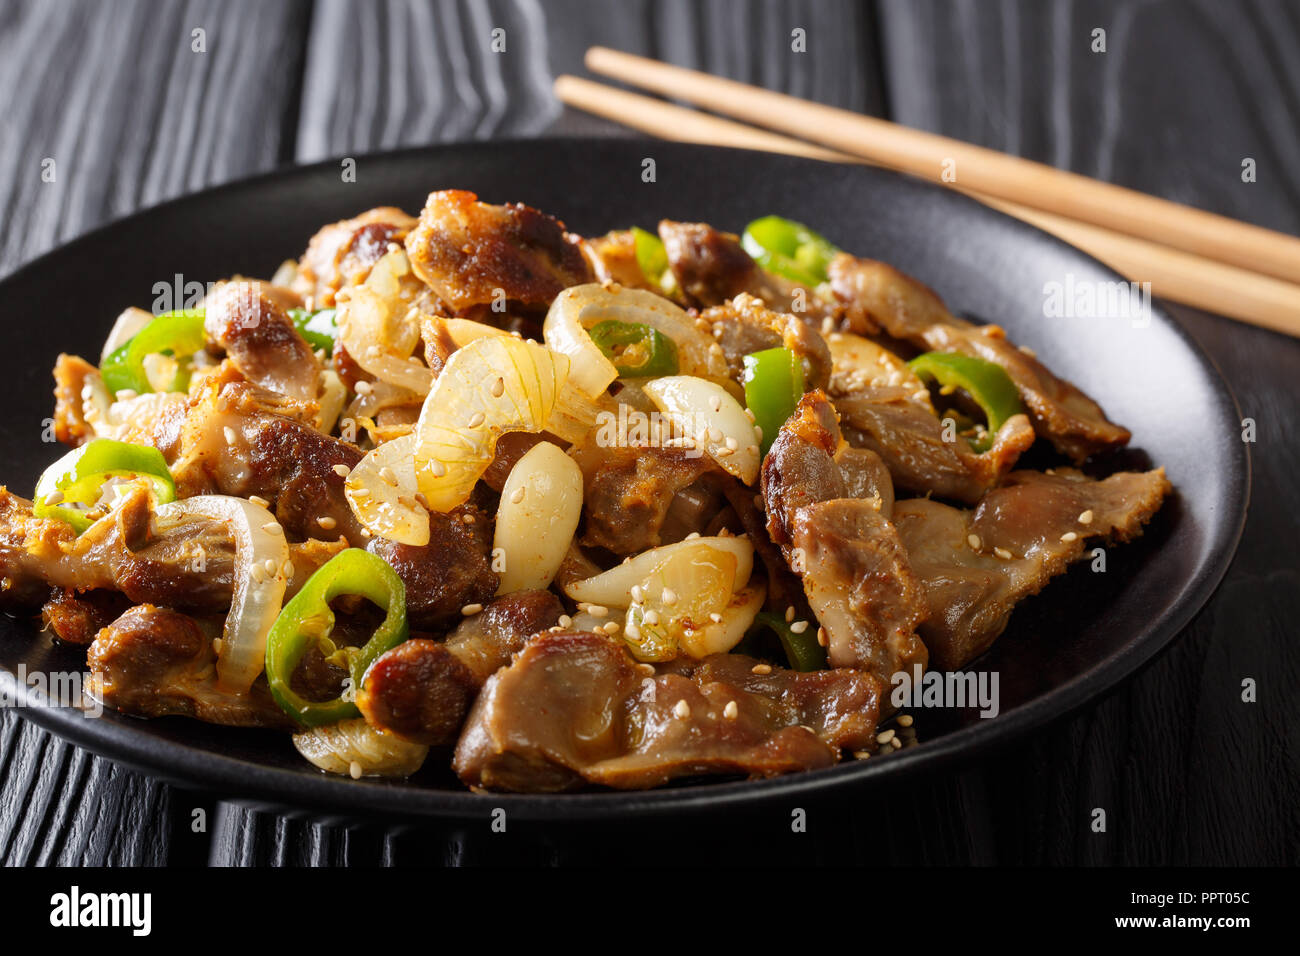 Chicken Gizzard Stew High Resolution Stock Photography And Images Alamy,Grilling Corn In Husk Without Soaking